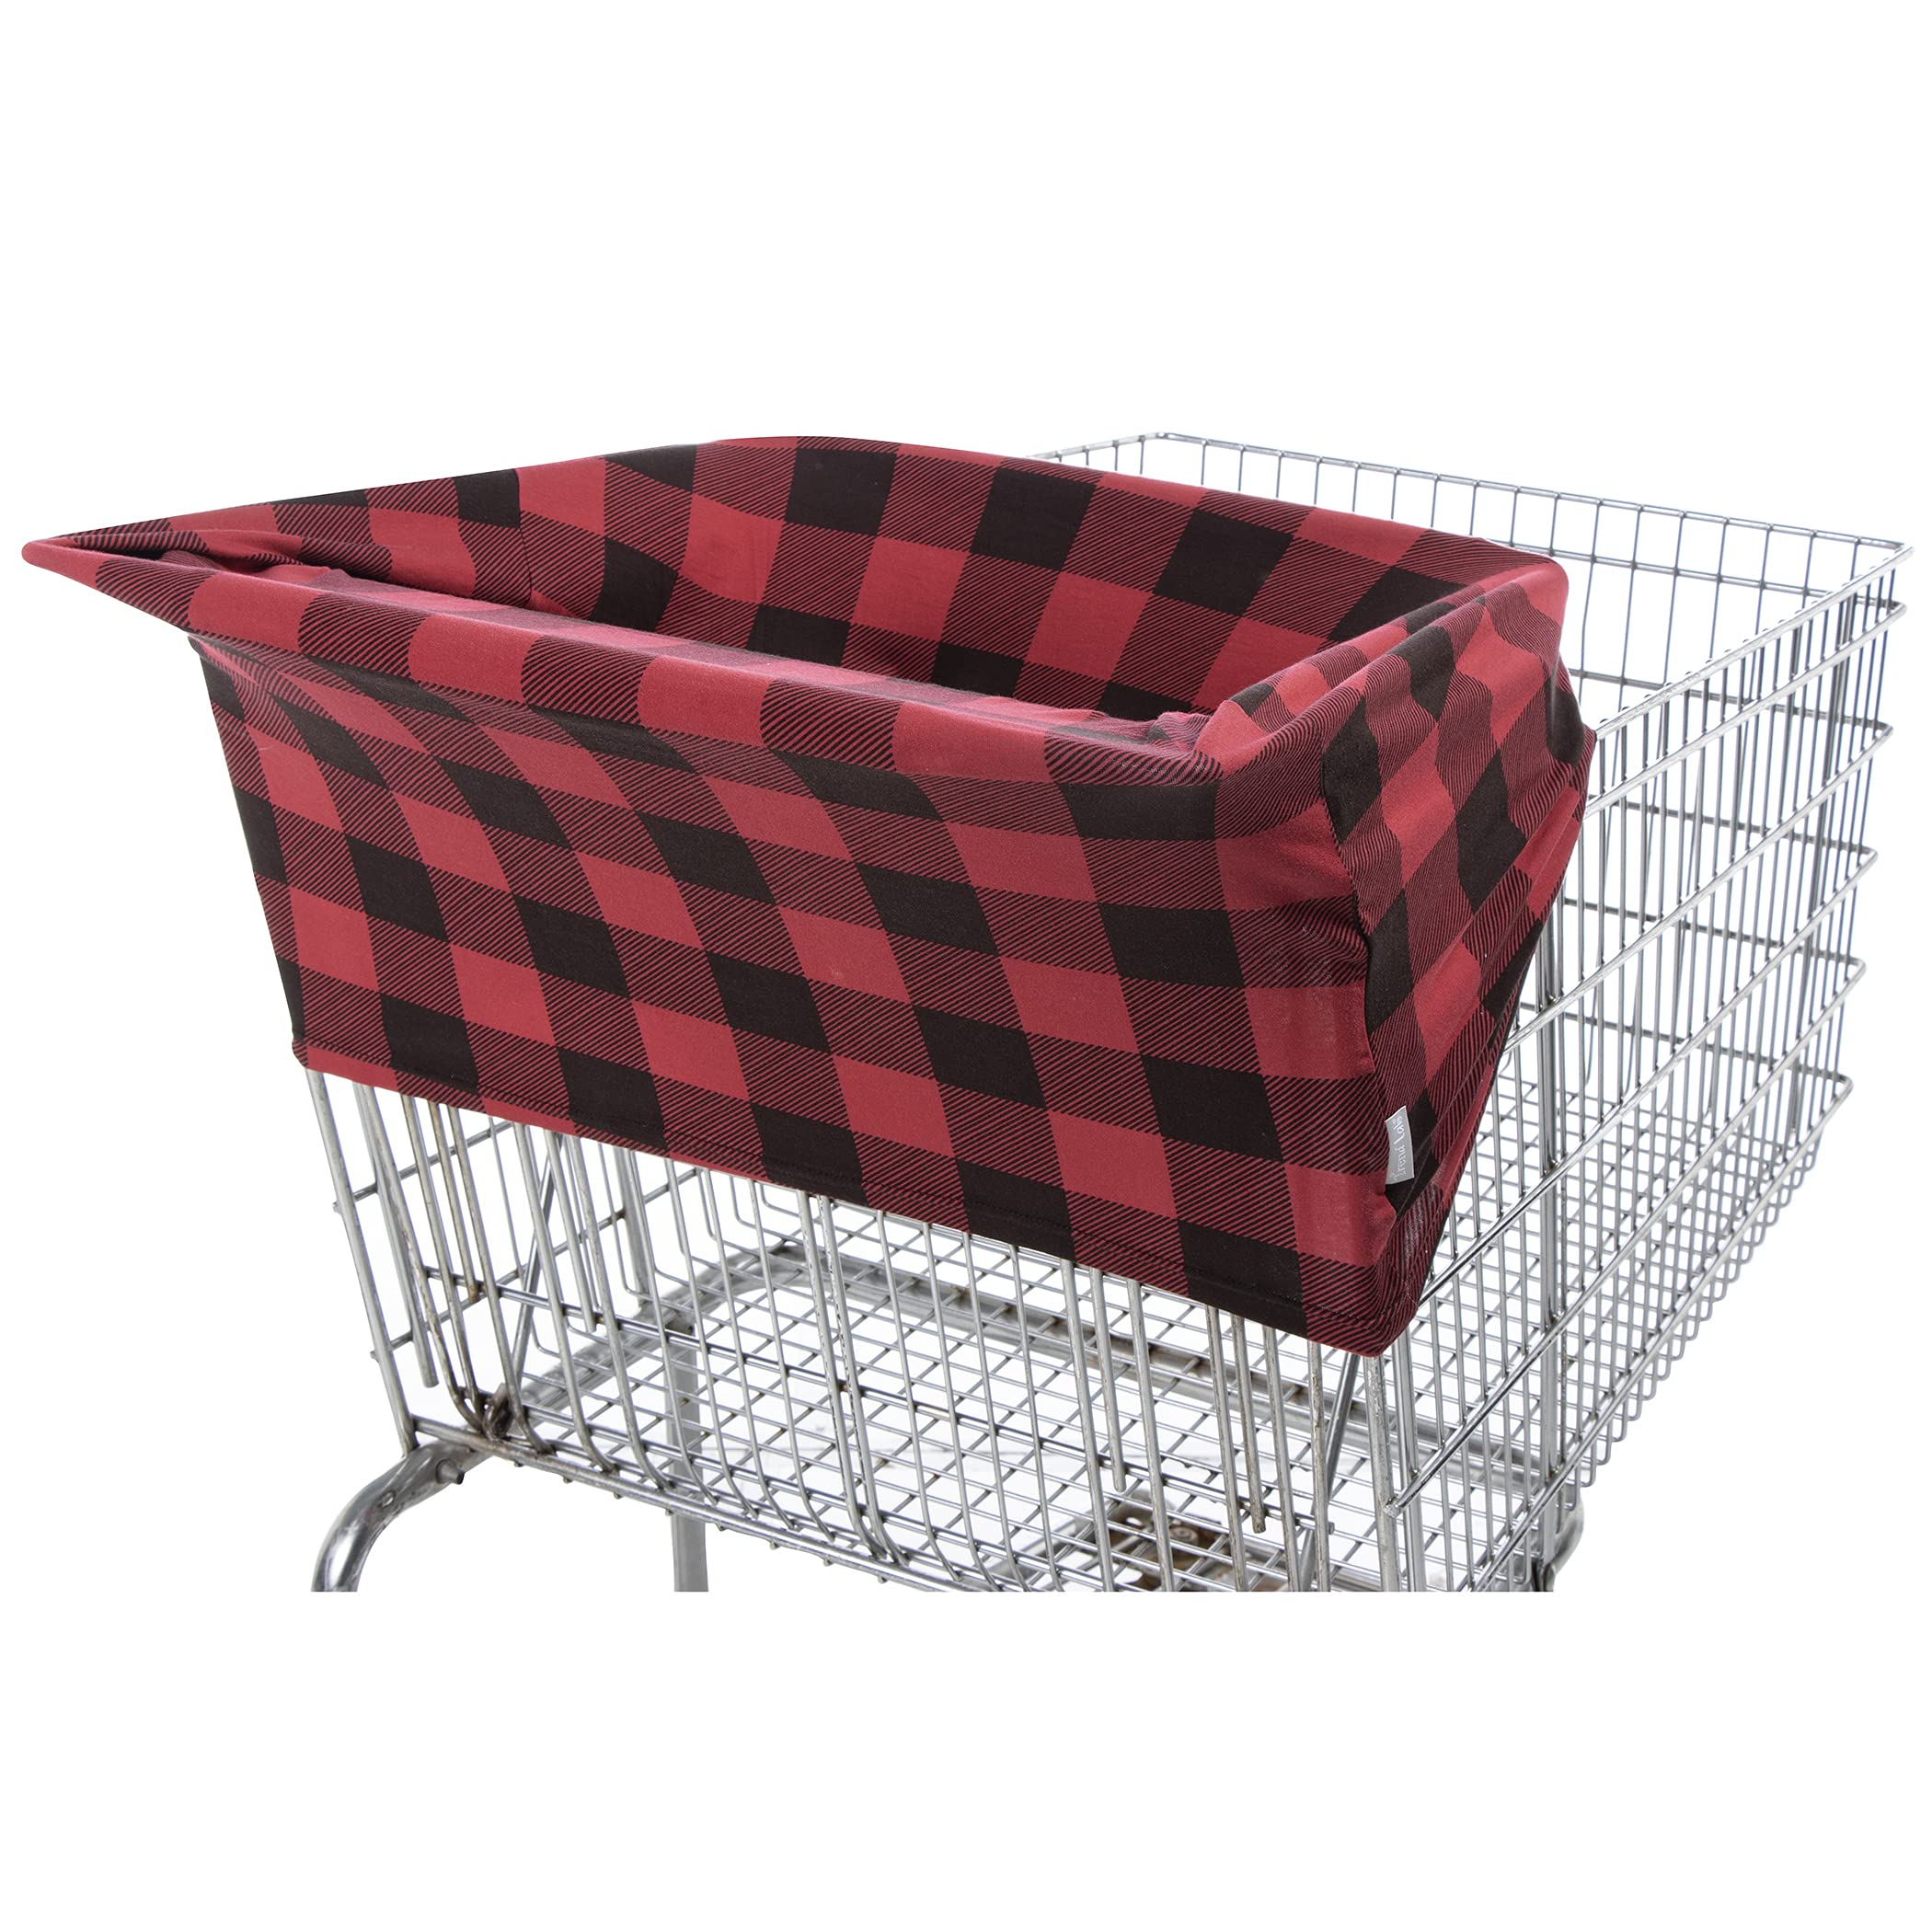 Buffalo Check Multi Use Nursing Wrap-Buffalo Check Print, Scarf, Nursing Cover, Car Seat Cover, Shopping Cart Cover, Cotton/Spandex Jersey, Red and Black, 28 in x 32 in